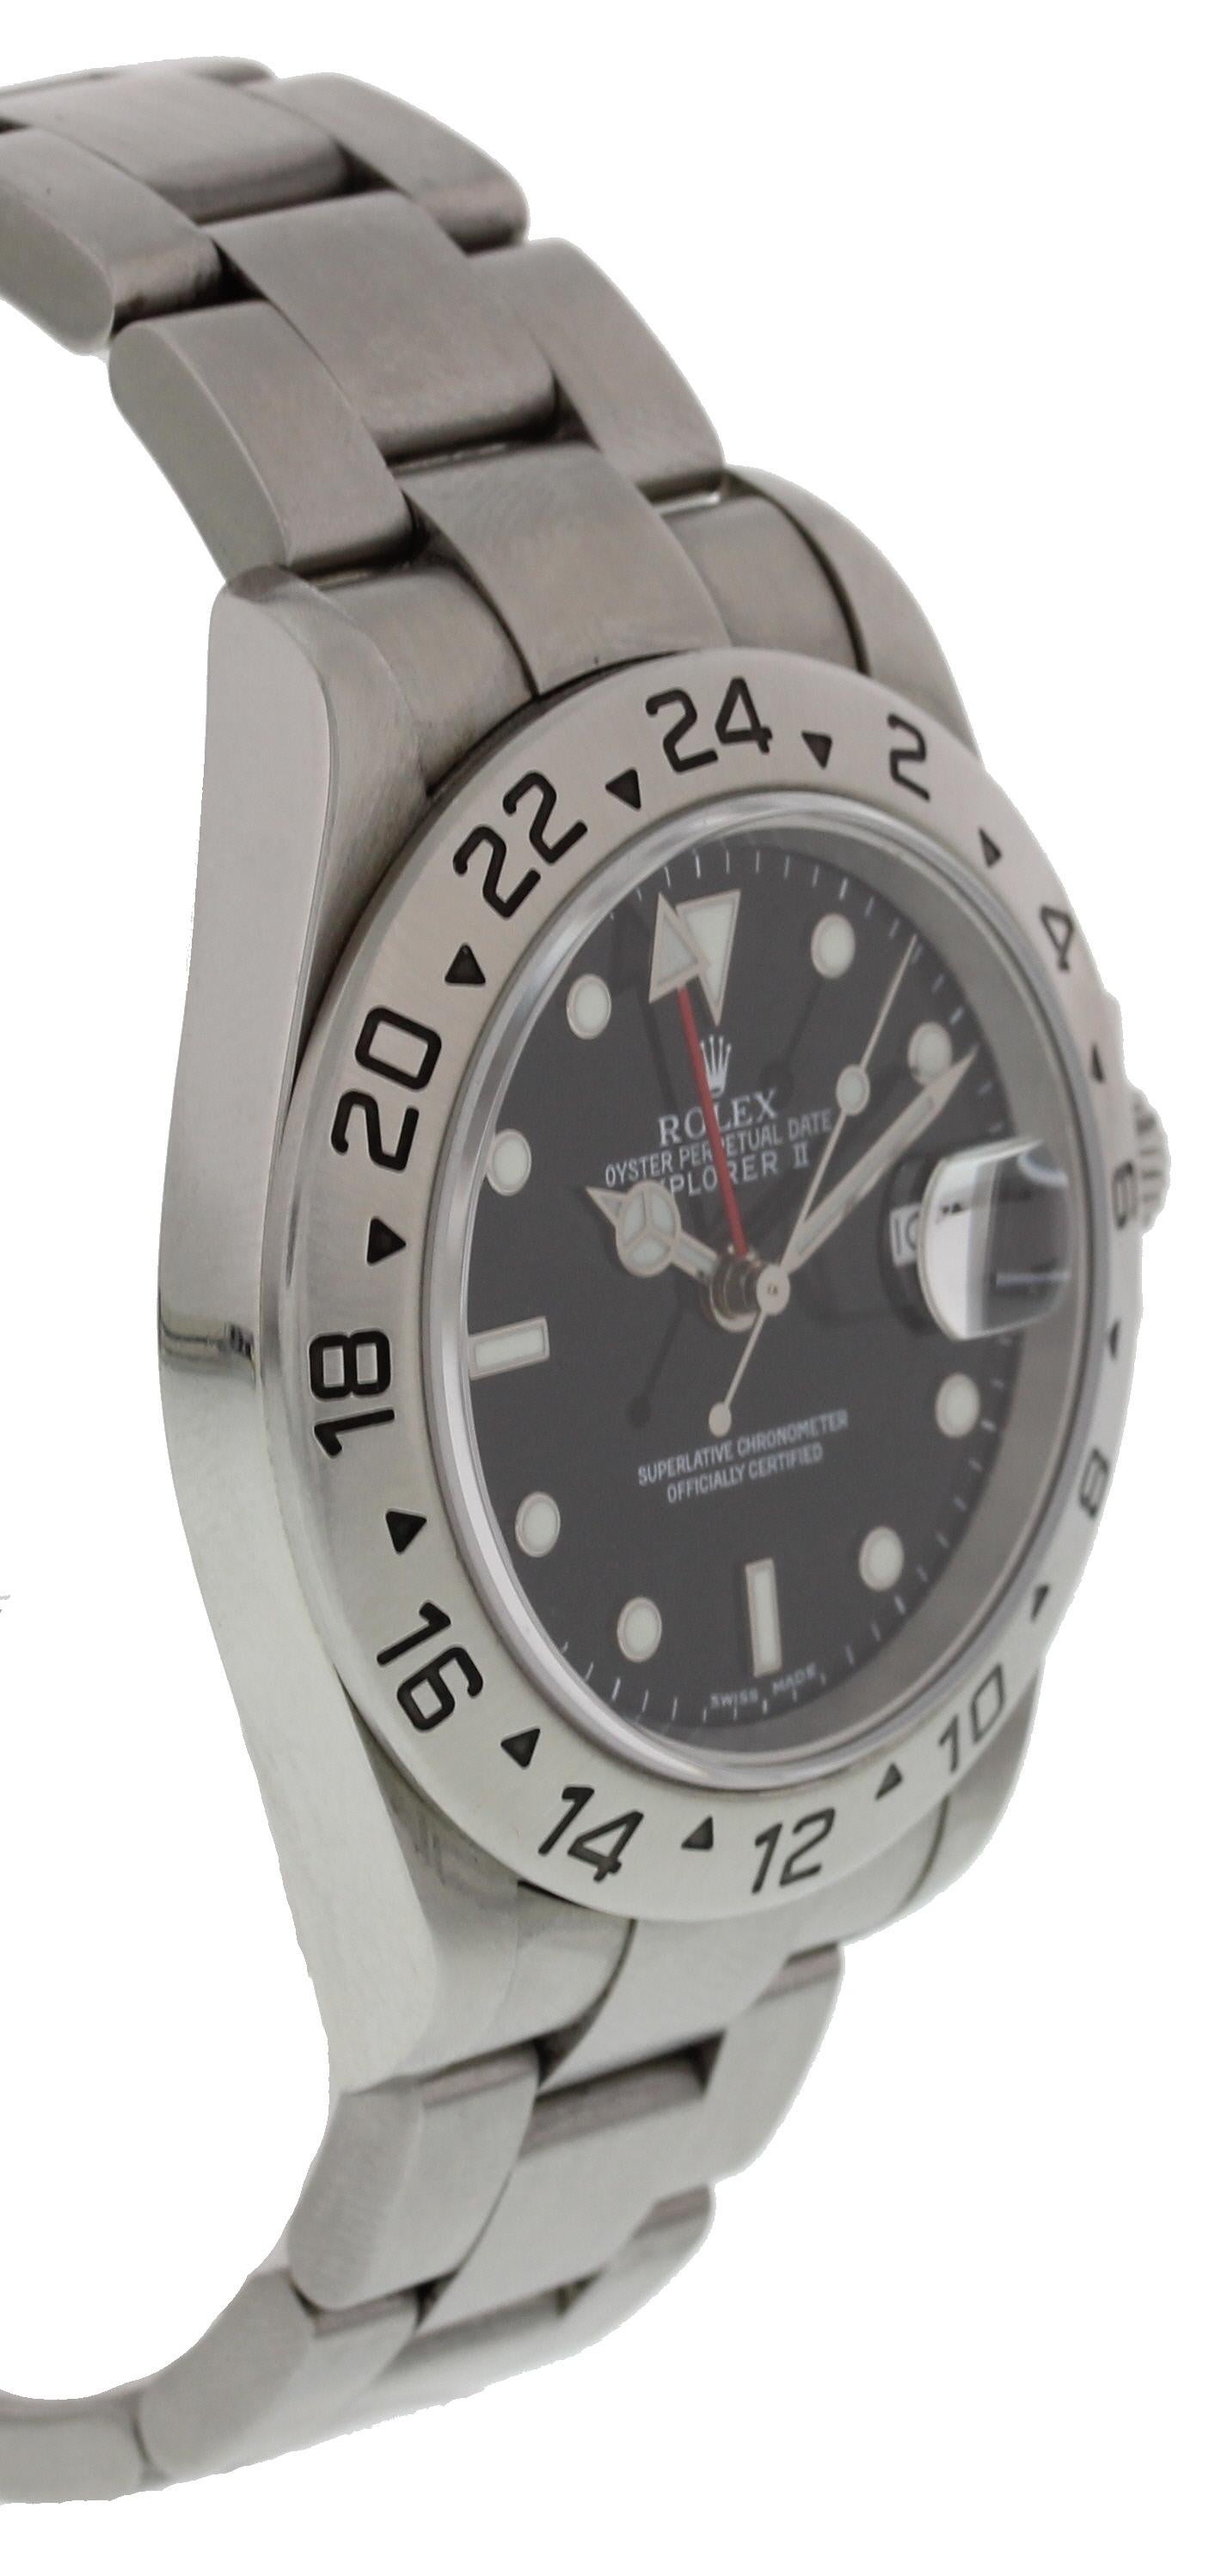 Rolex Oyster Perpetual Date Explorer II 16570 In Excellent Condition For Sale In New York, NY